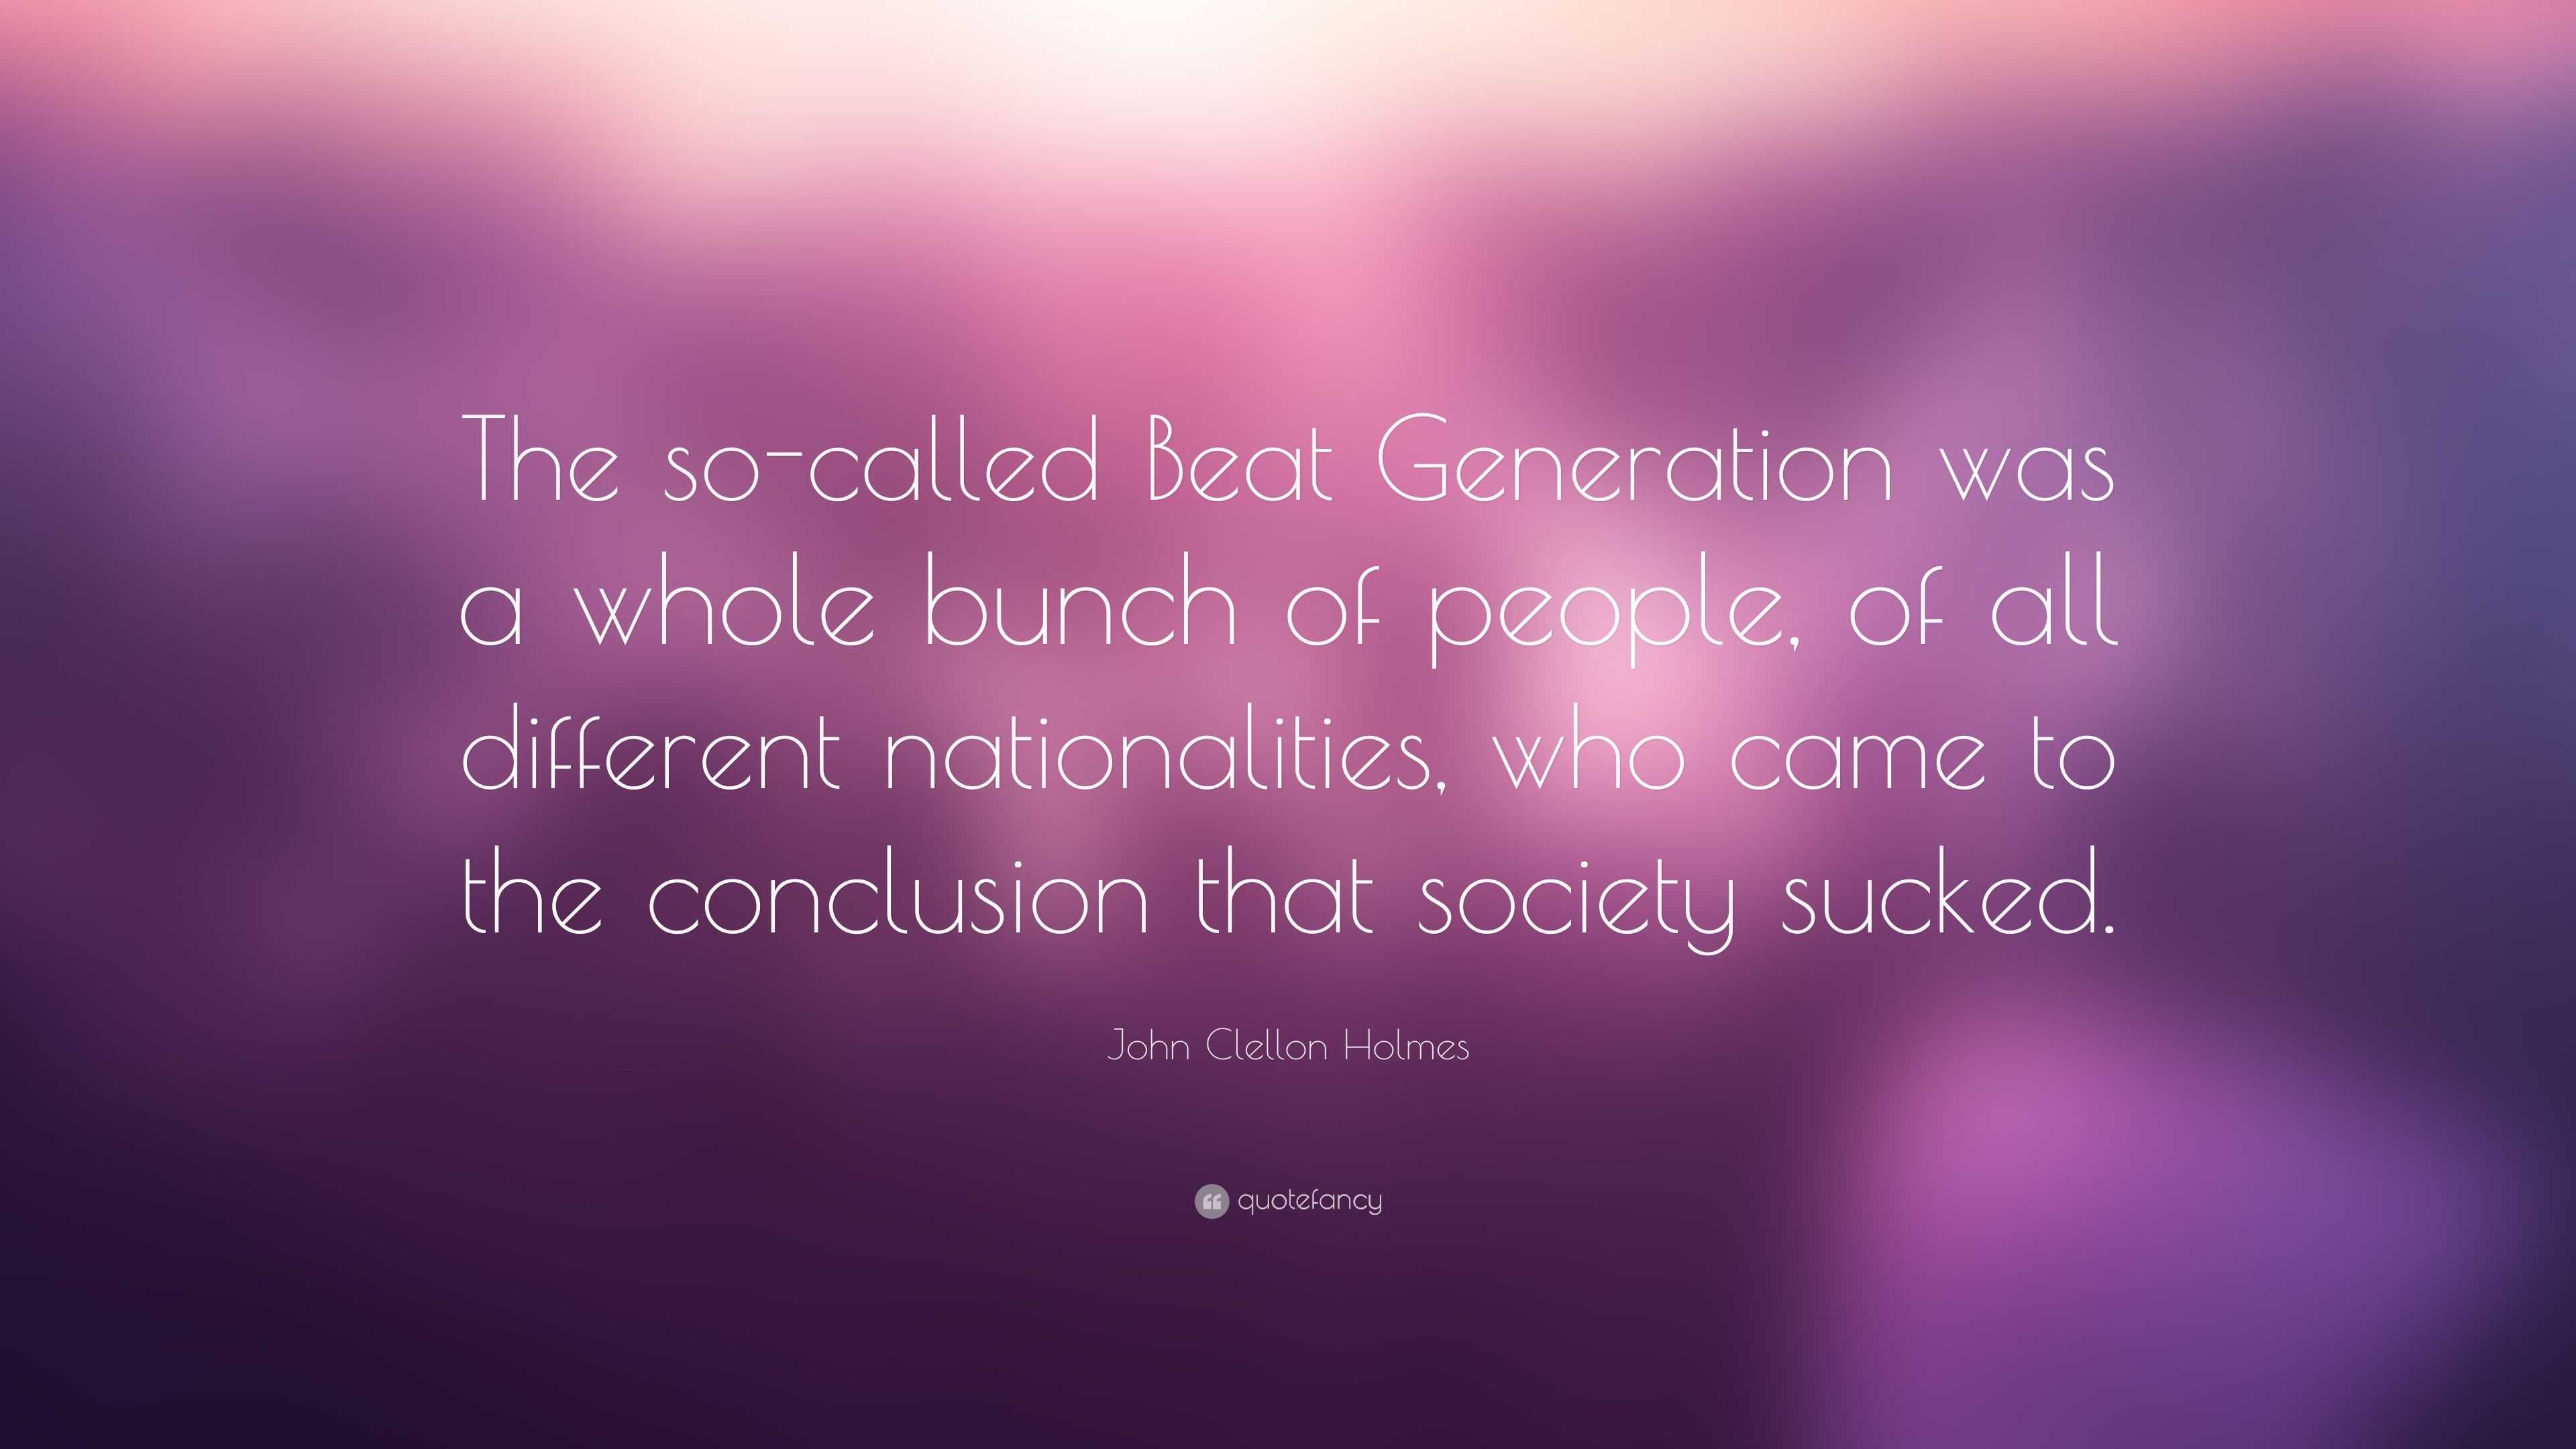 John Clellon Holmes Quote: "The so-called Beat Generation ...